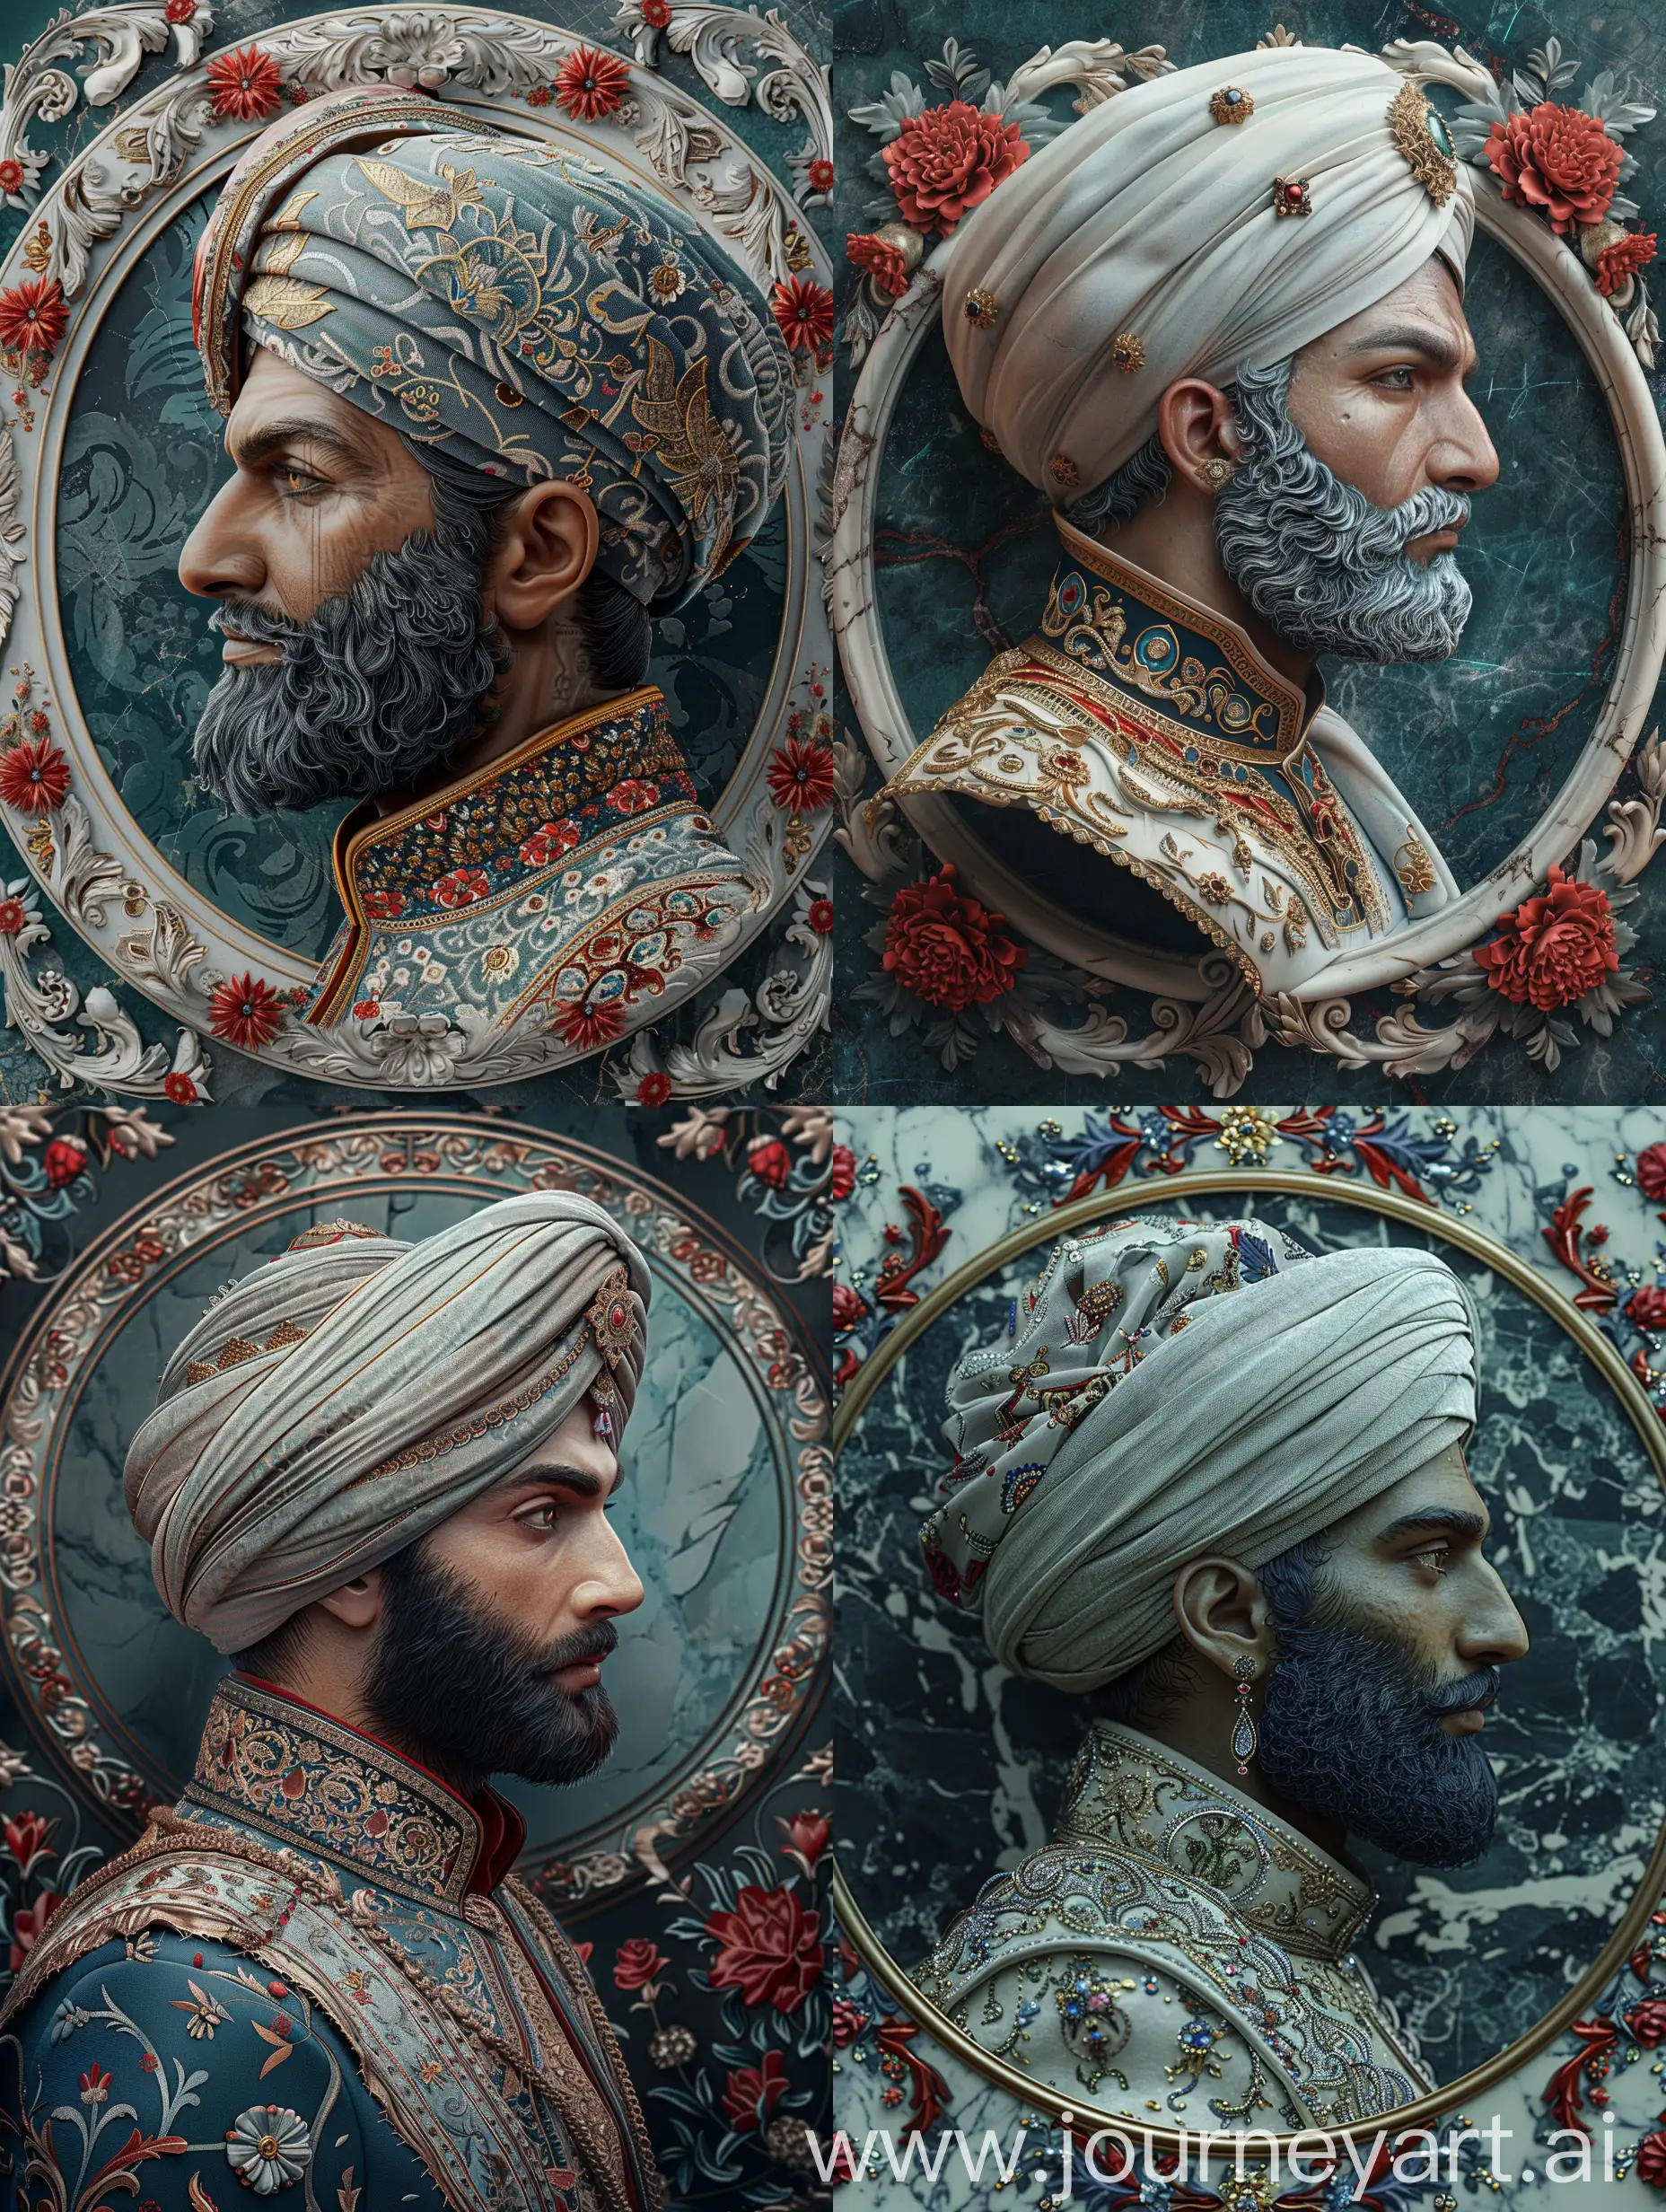 Isometric-Digital-Artwork-Ottoman-Sultan-Carved-in-Marble-Relief-Style